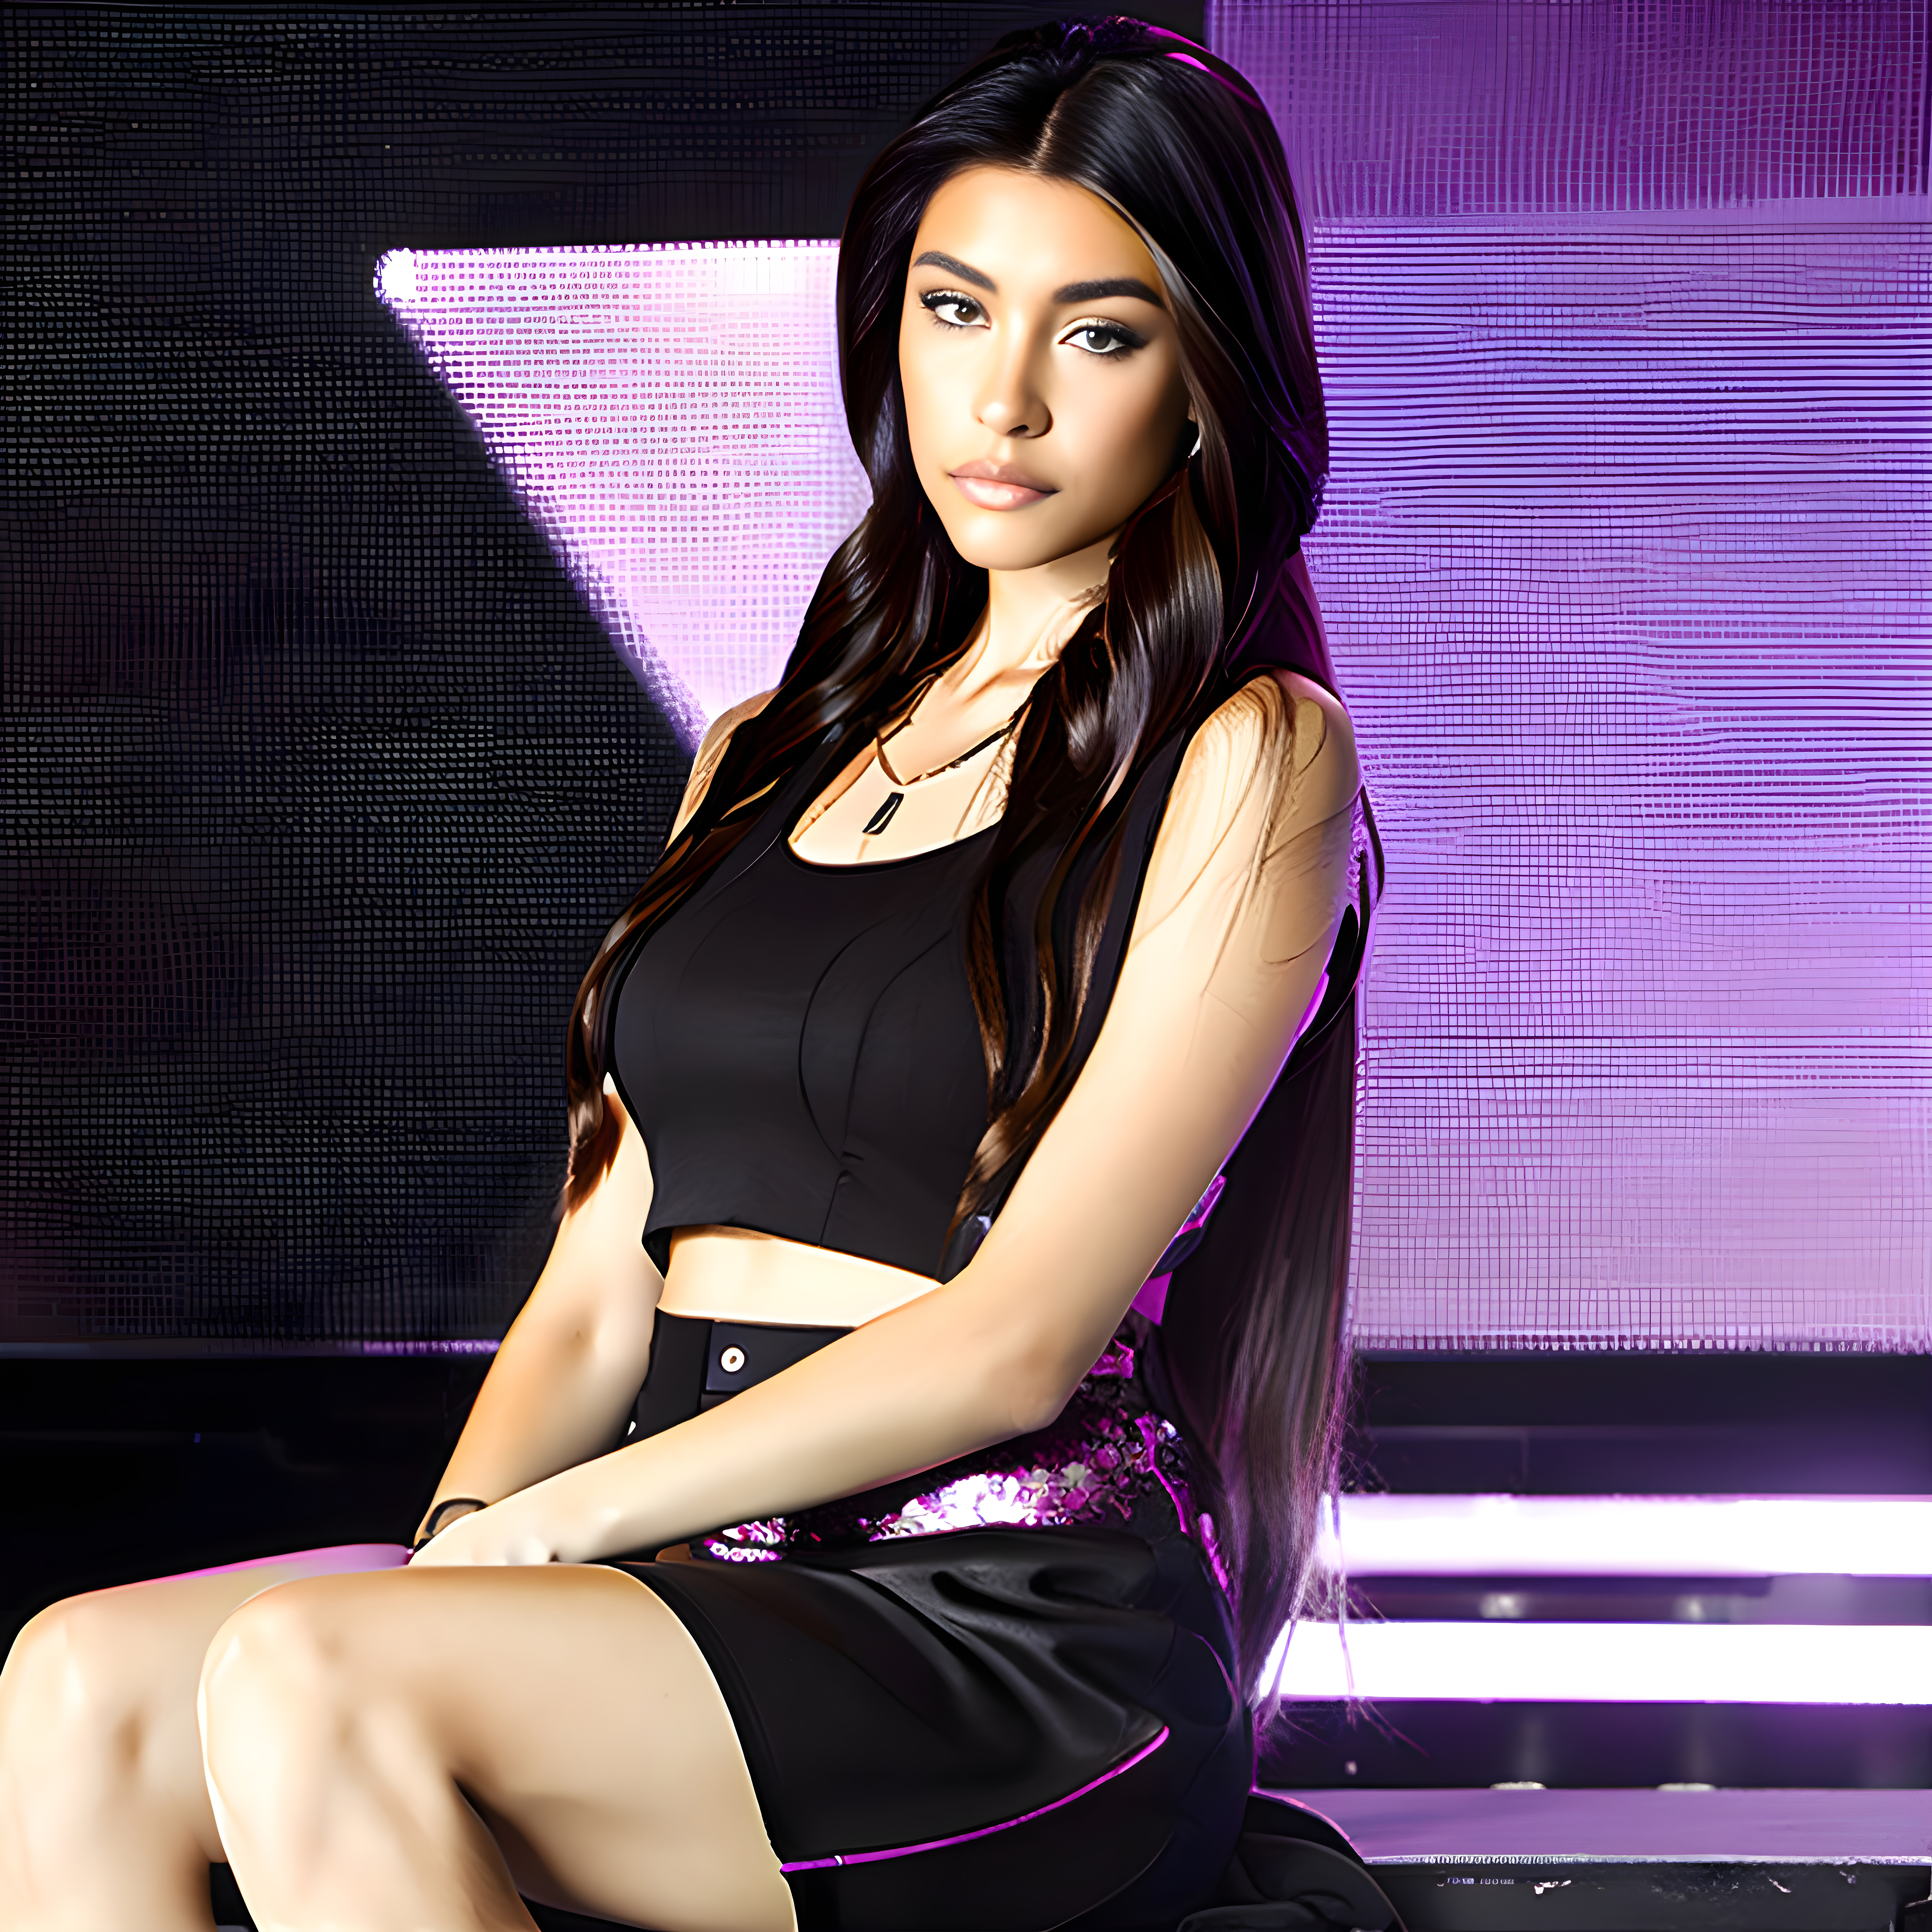 MadisonBeer image by 83catsonthemoon